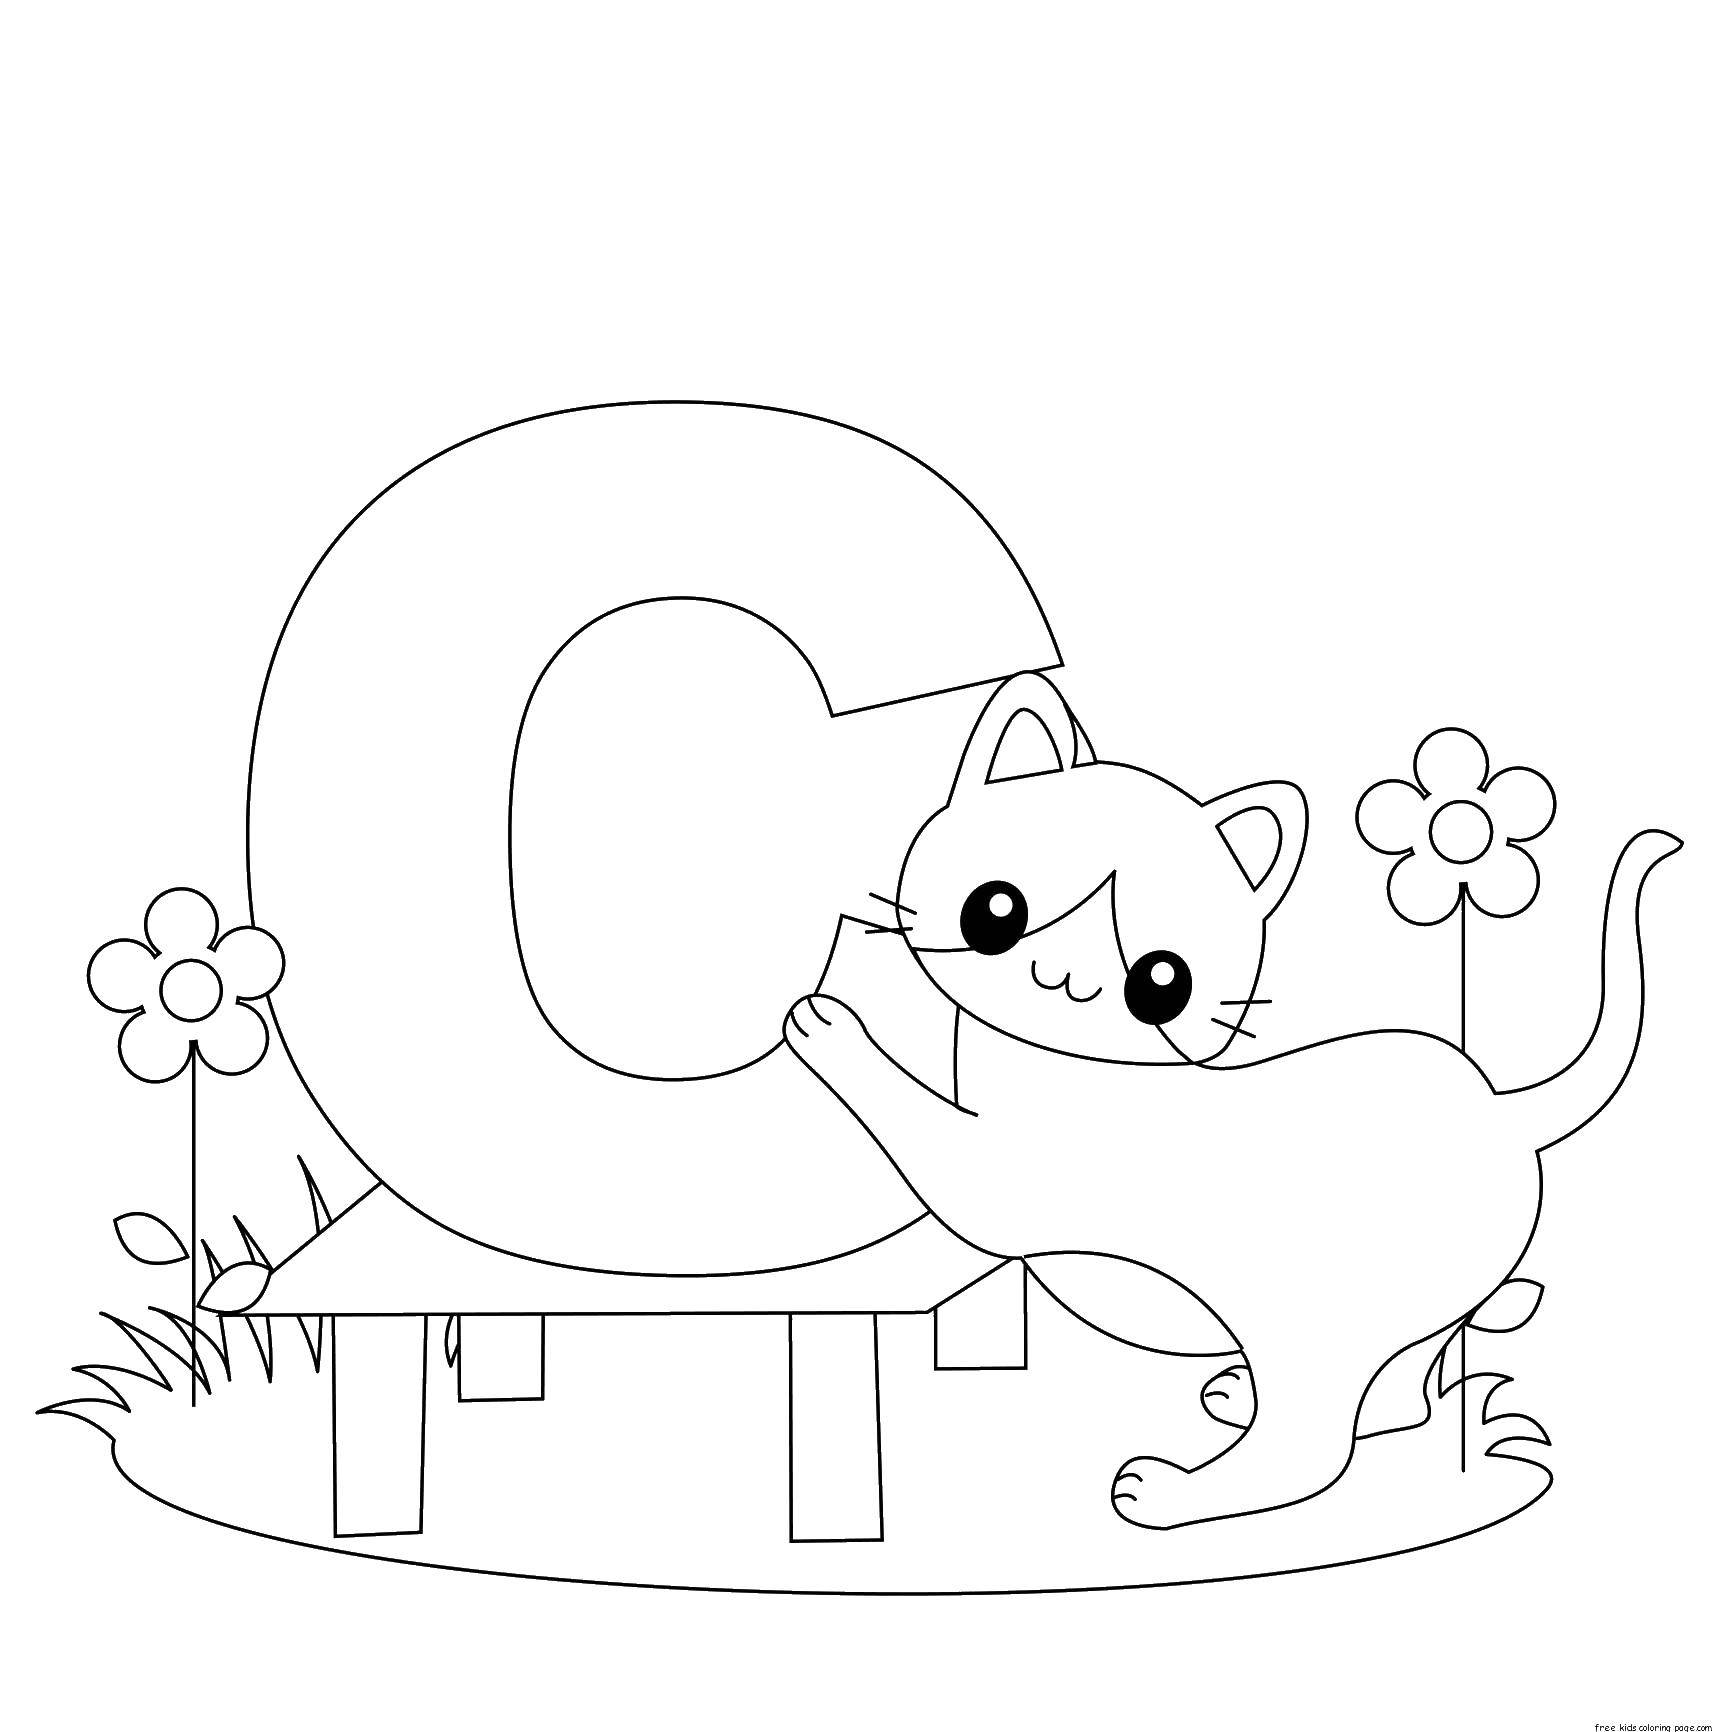 Coloring Letter c. Category English alphabet. Tags:  the letter, kitty.